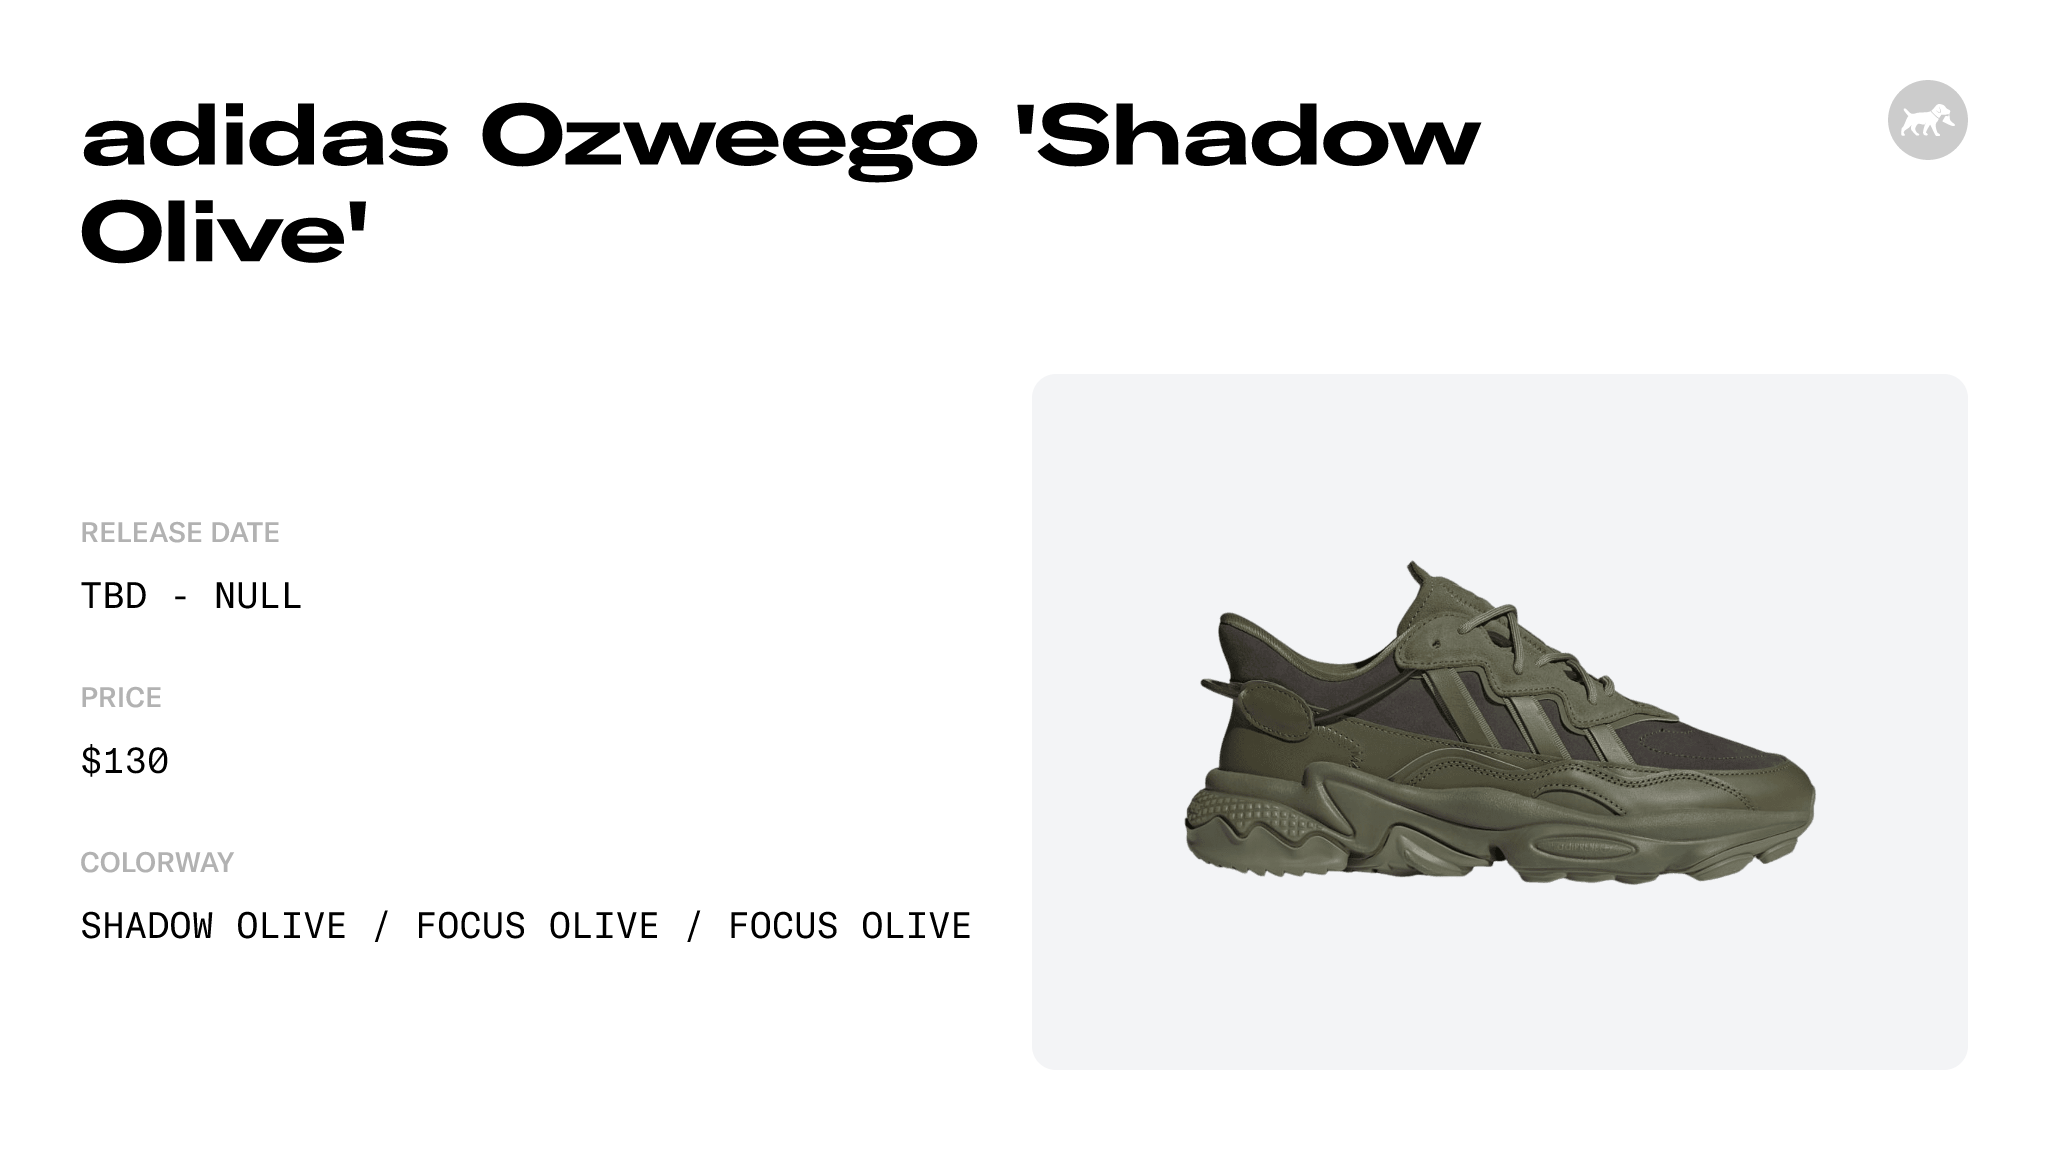 adidas Ozweego 'Shadow Olive' - IF7915 Raffles and Release Date